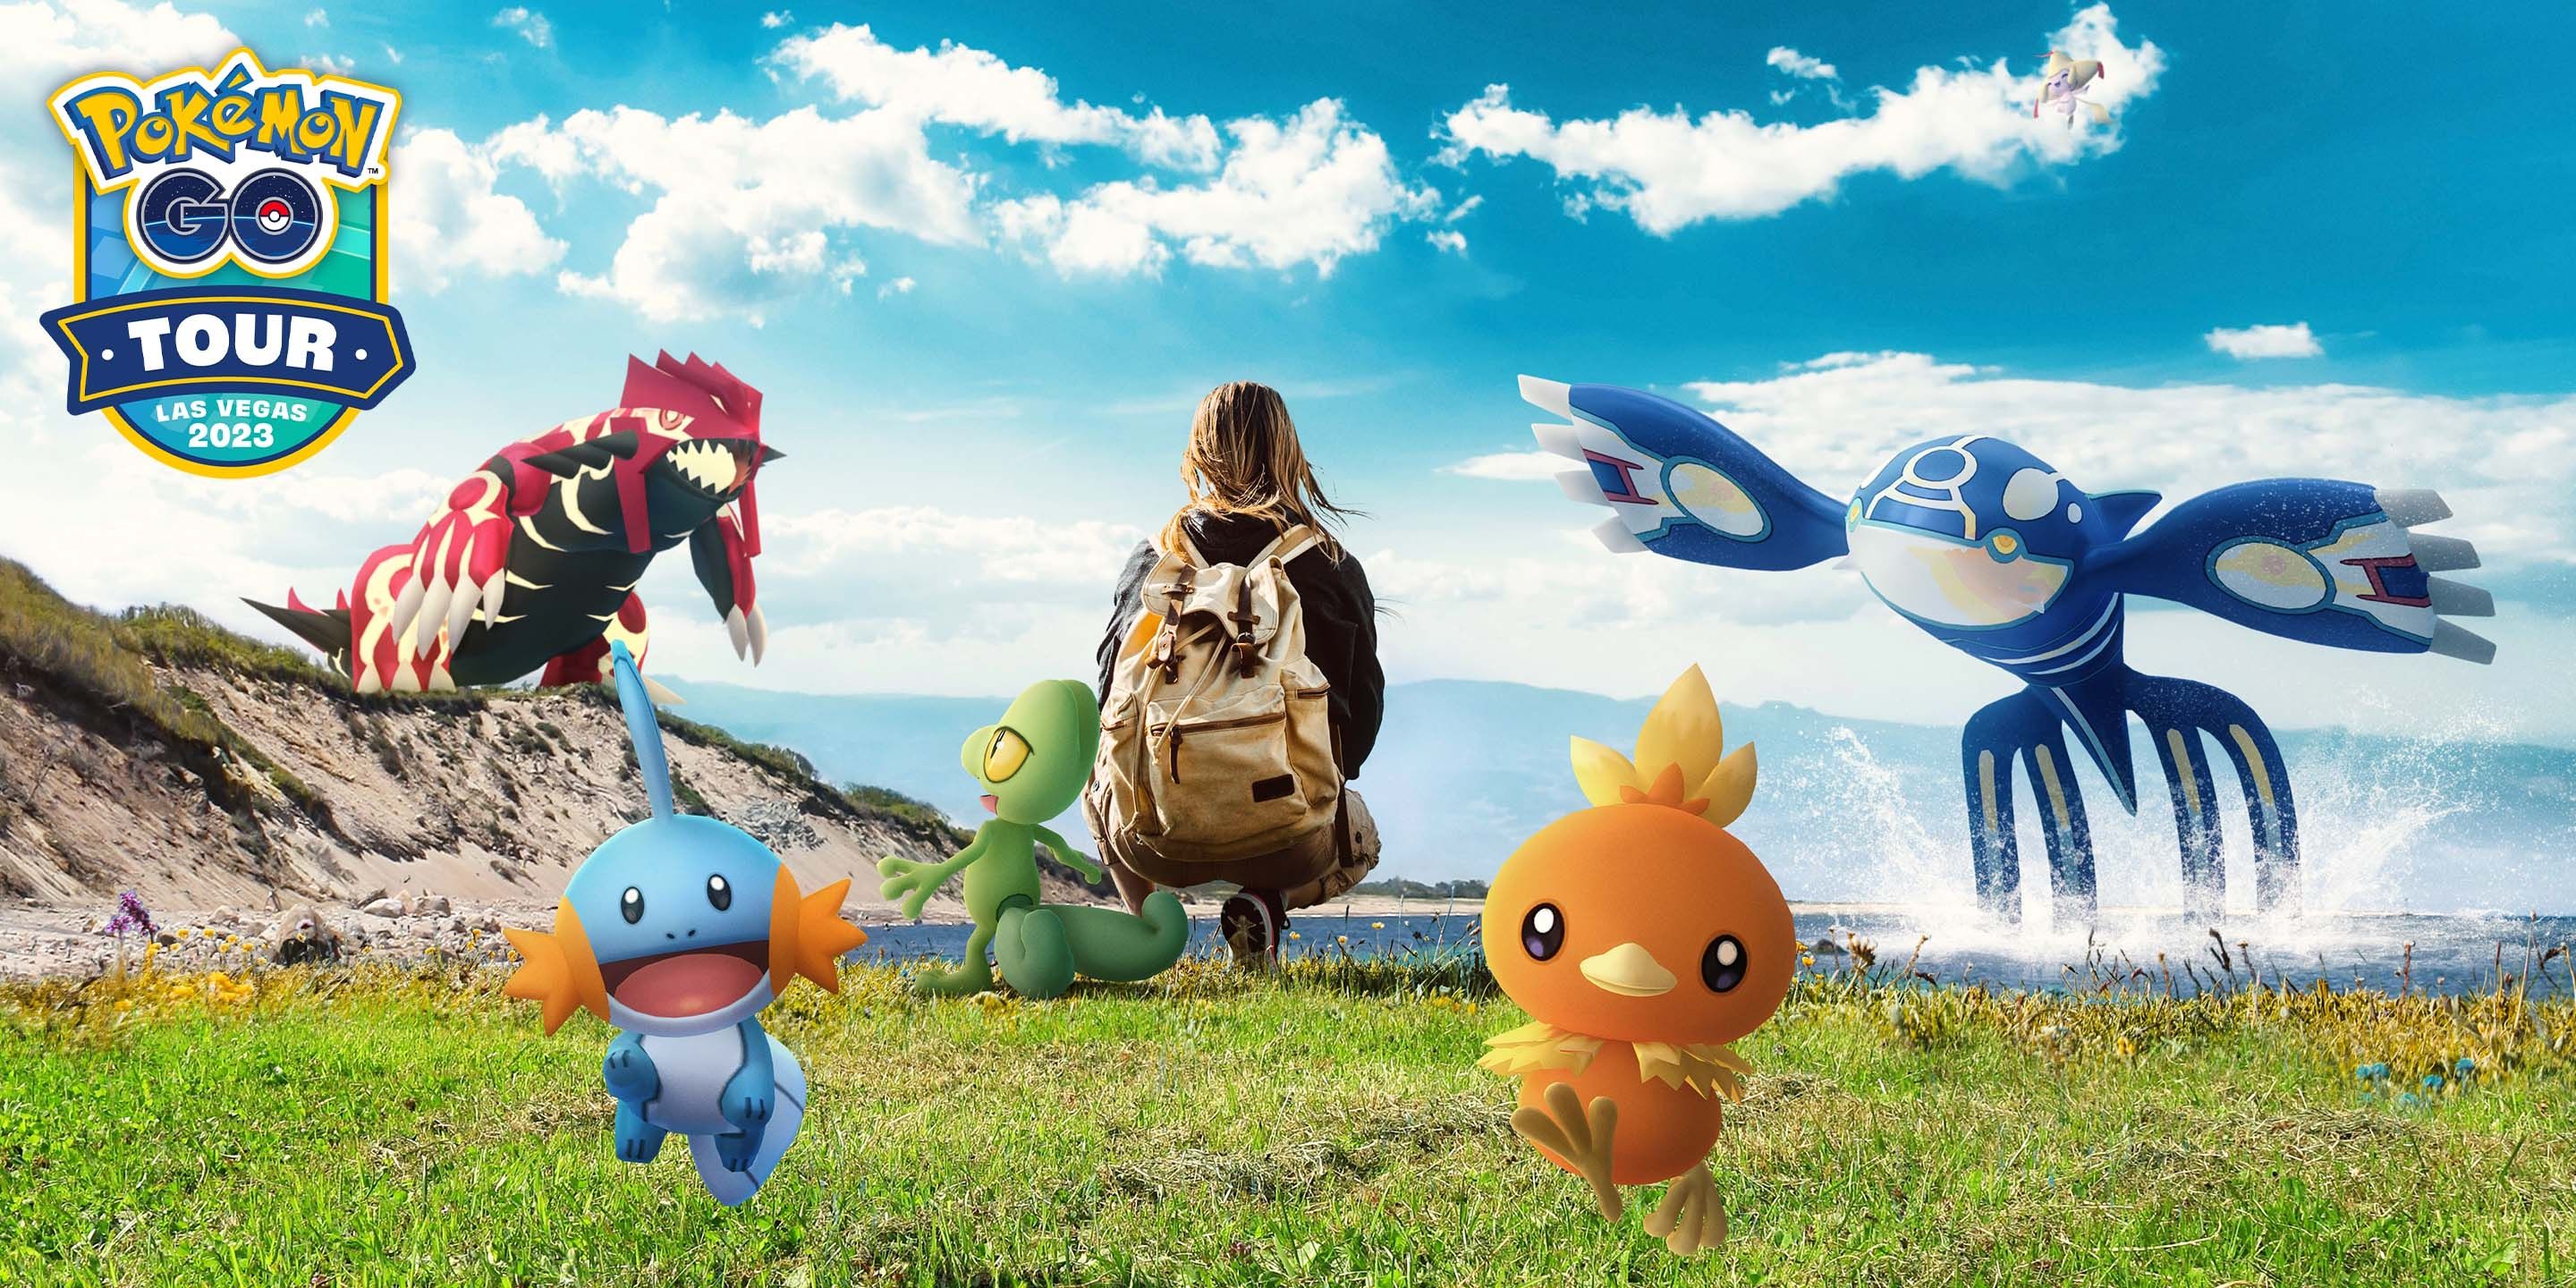 Pokemon Go Tour image with several Pokemon including Primal Groudon, Mudkip, Torchic, and Primal Kyogre